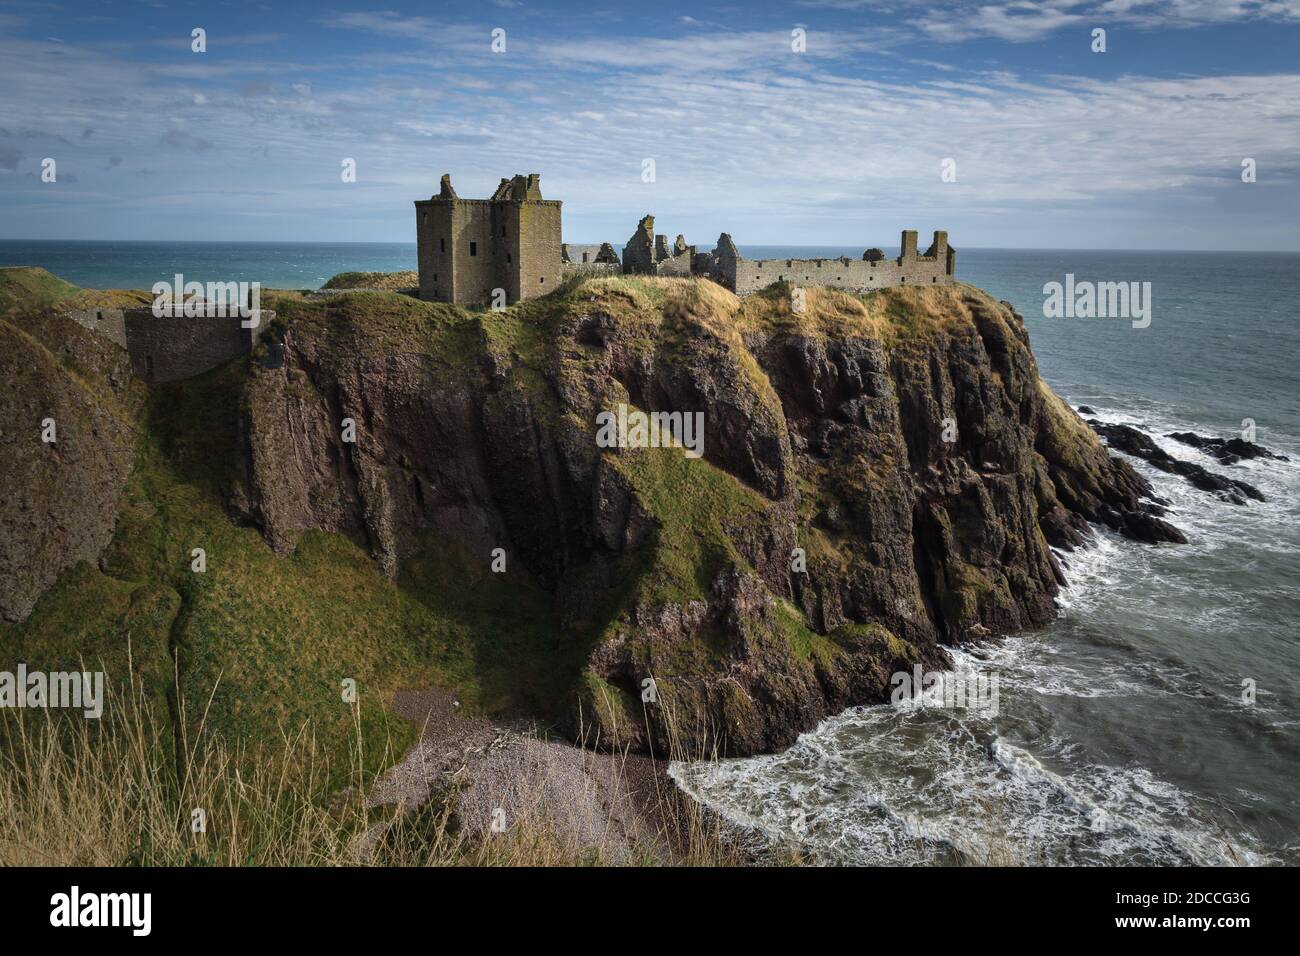 Dunnottar Castle on top of a cliff by the sea on a cloudy day, Stonehaven, Scotland, United Kingdom Stock Photo